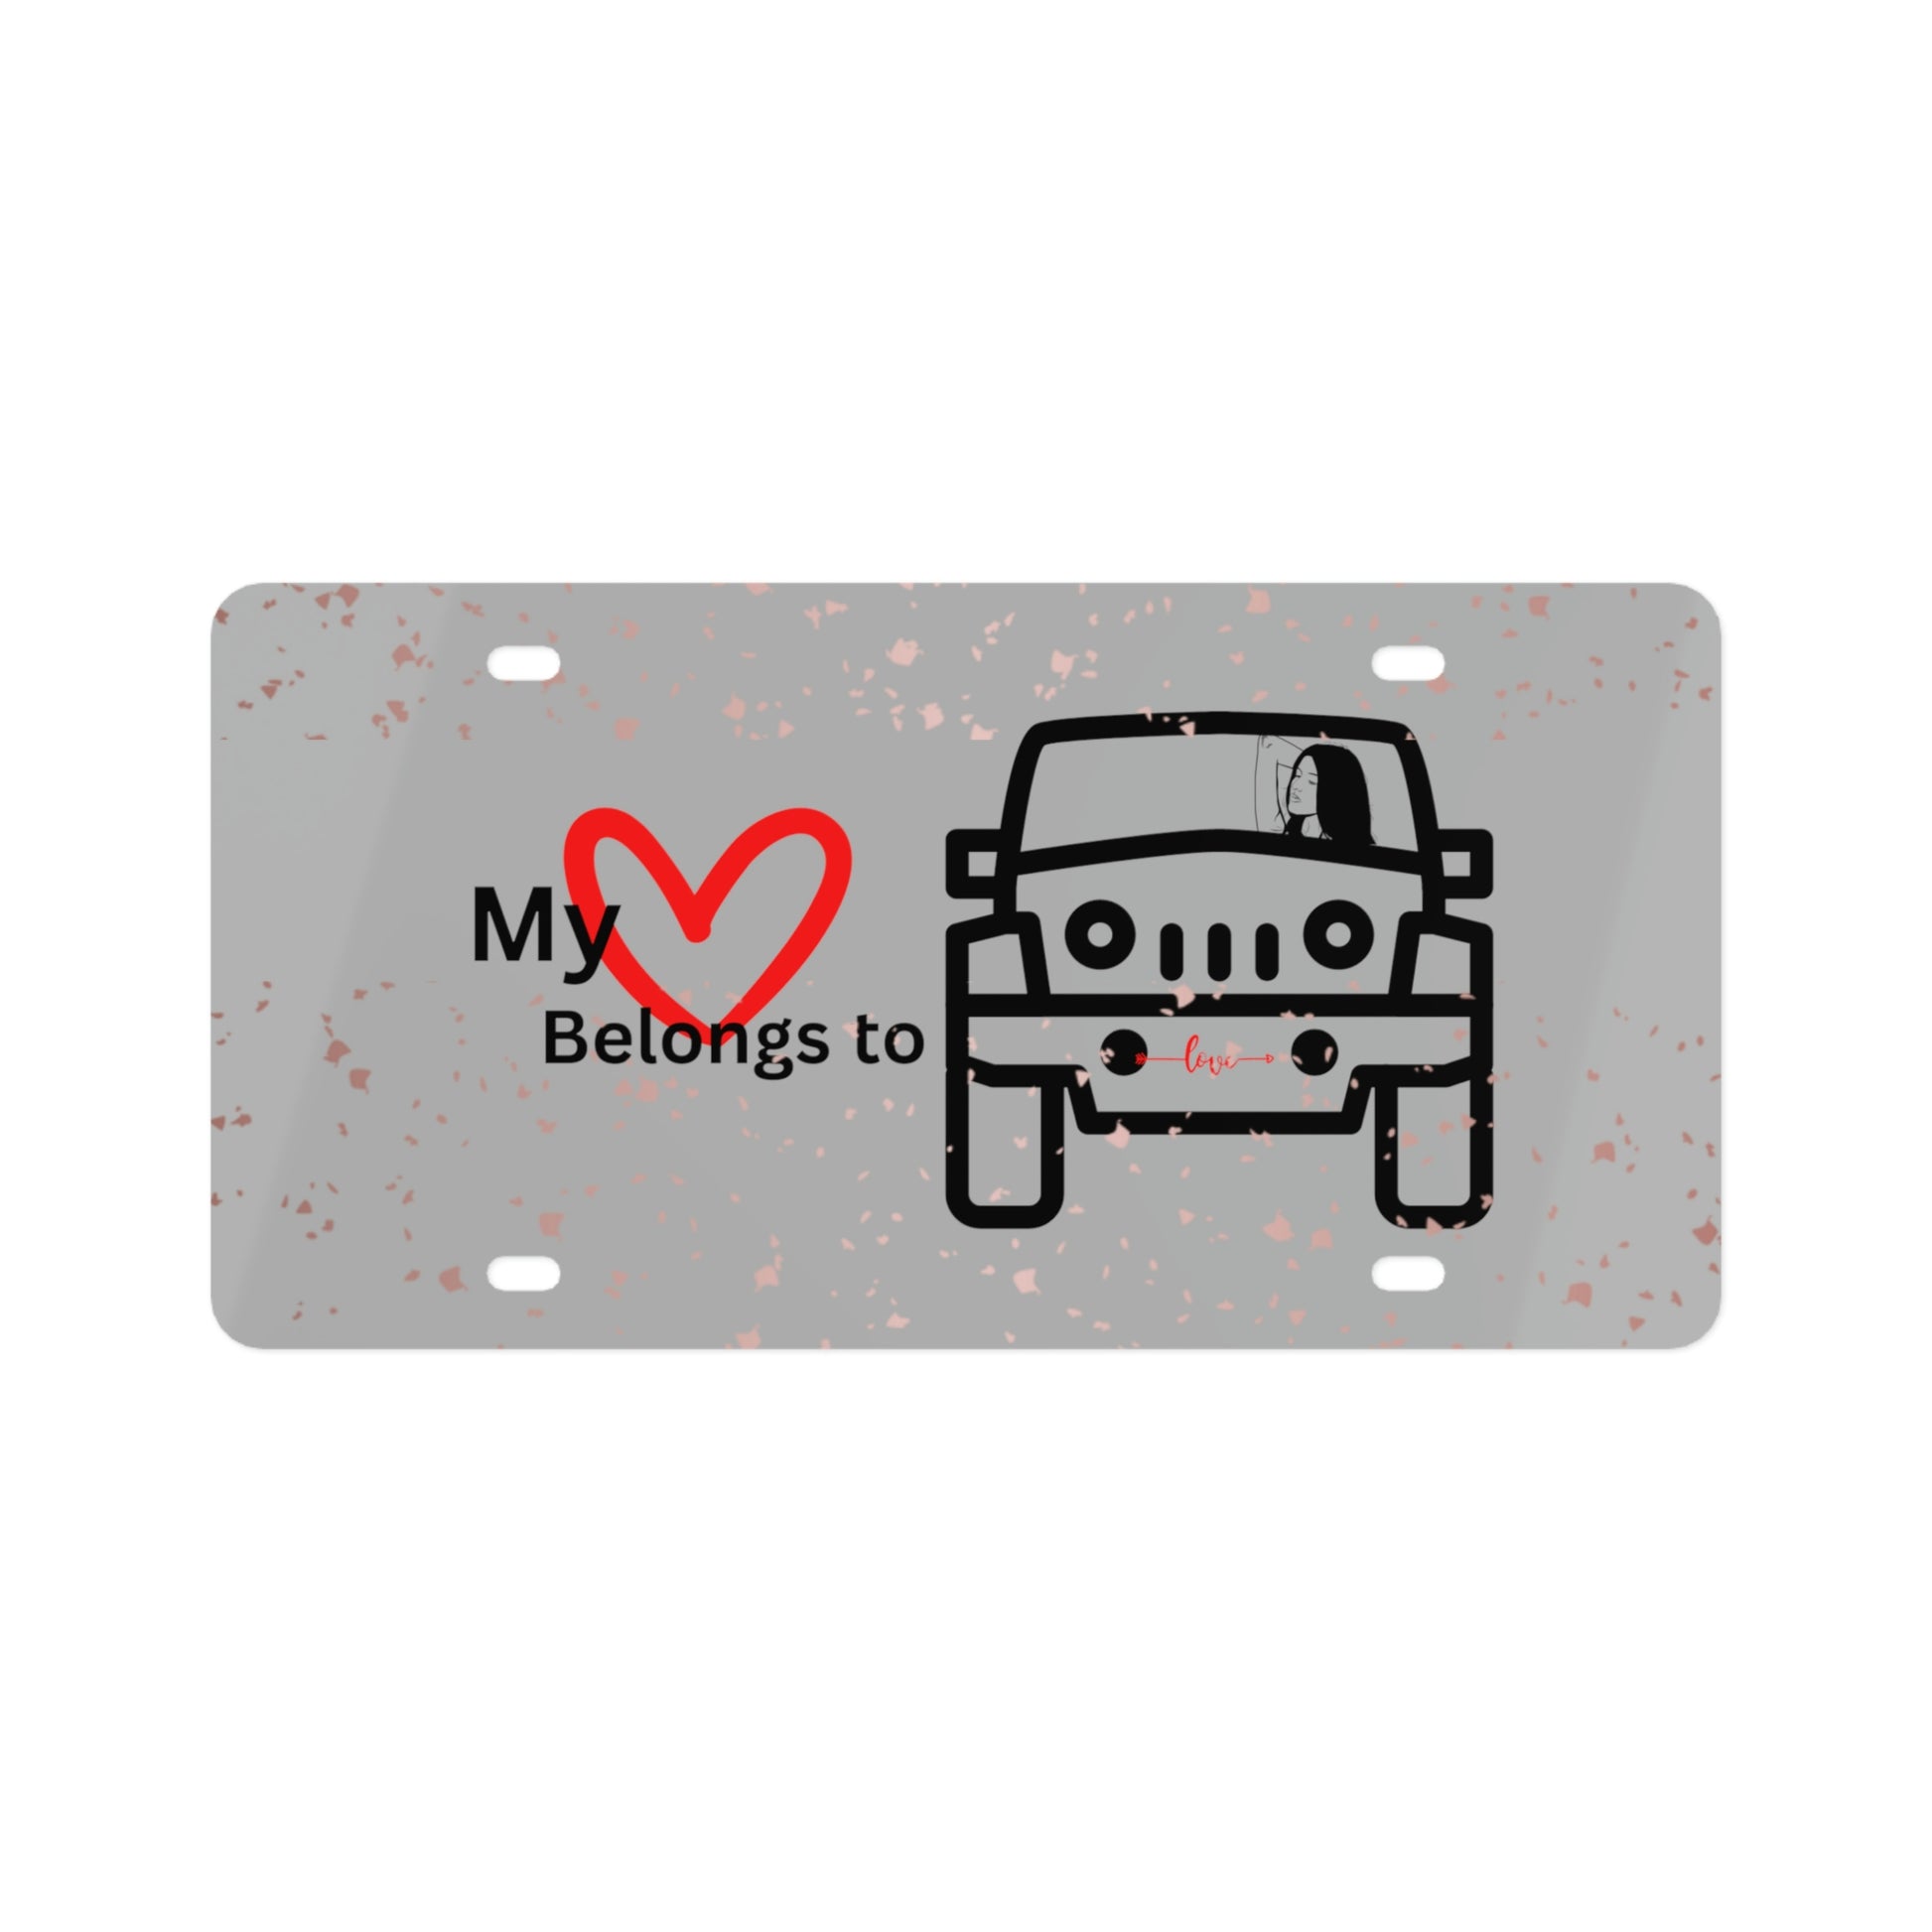 My Heart-Jeep License Plate | BKLA | Shoes & Accessories | shoes, hats, phone covers, tote bags, clutch bags